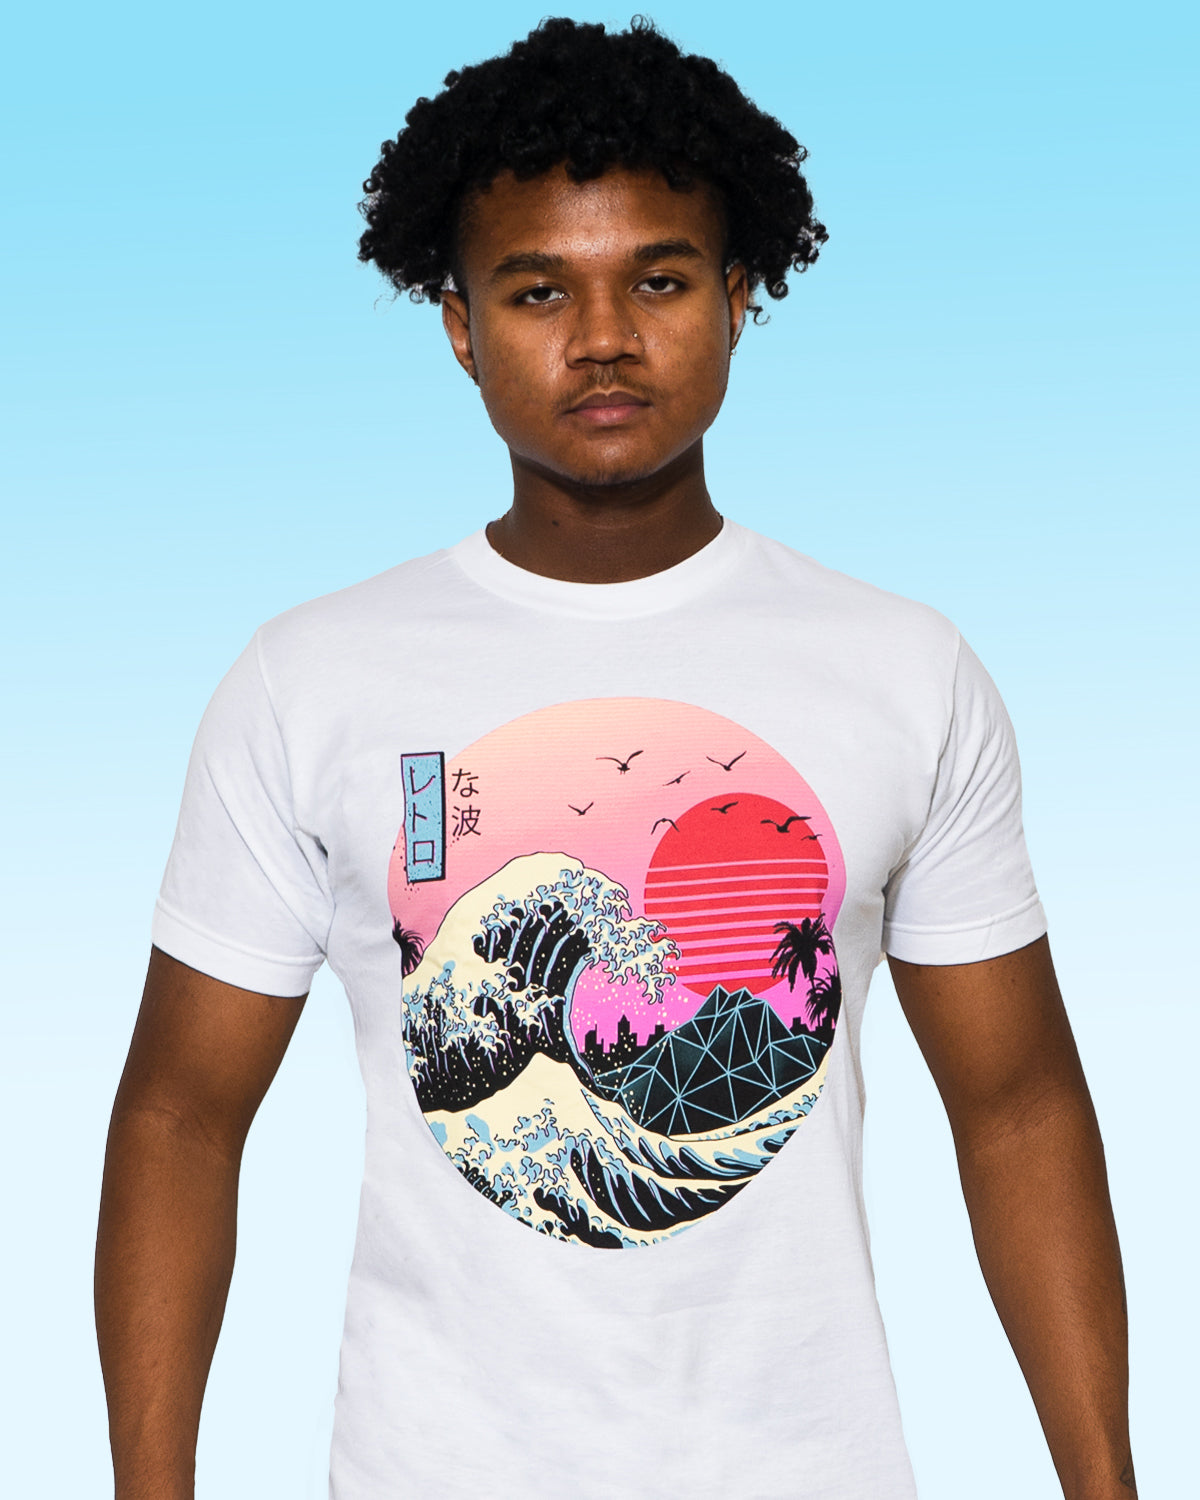 Experience Aesthetic and Vaporwave fashion with Vapor95's Graphic Tees ...